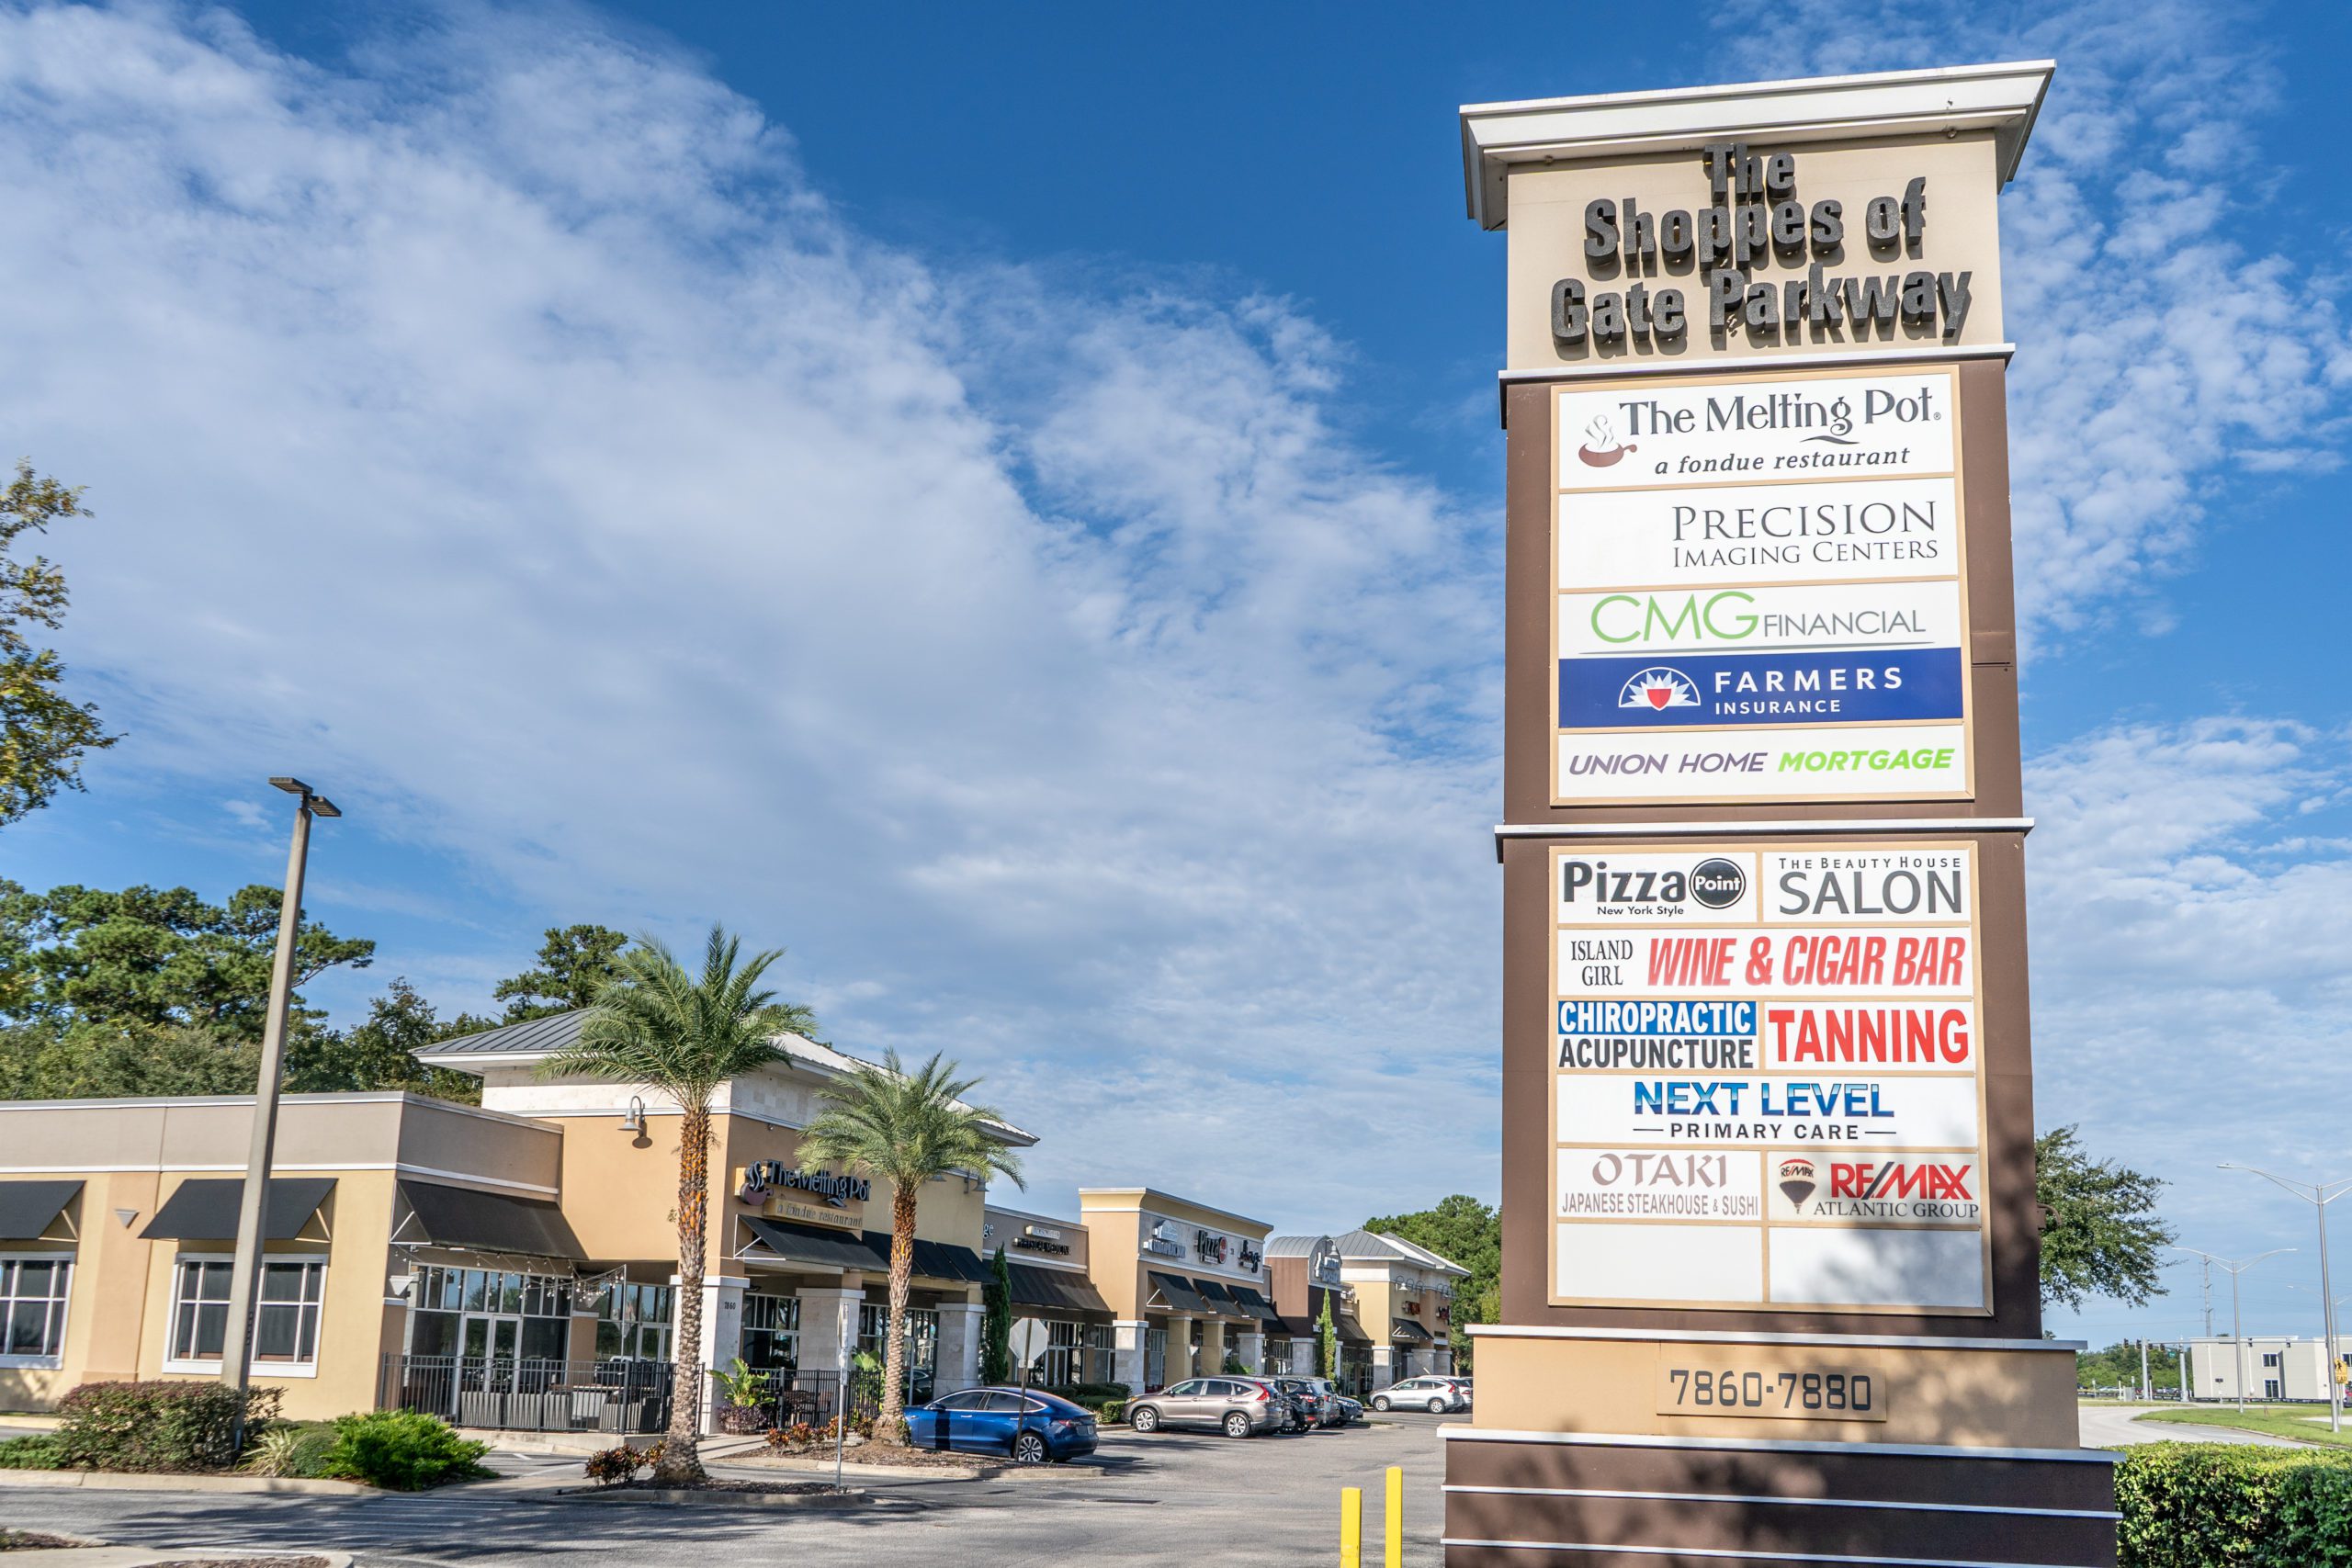 The signage and exterior of a retail shopping center.